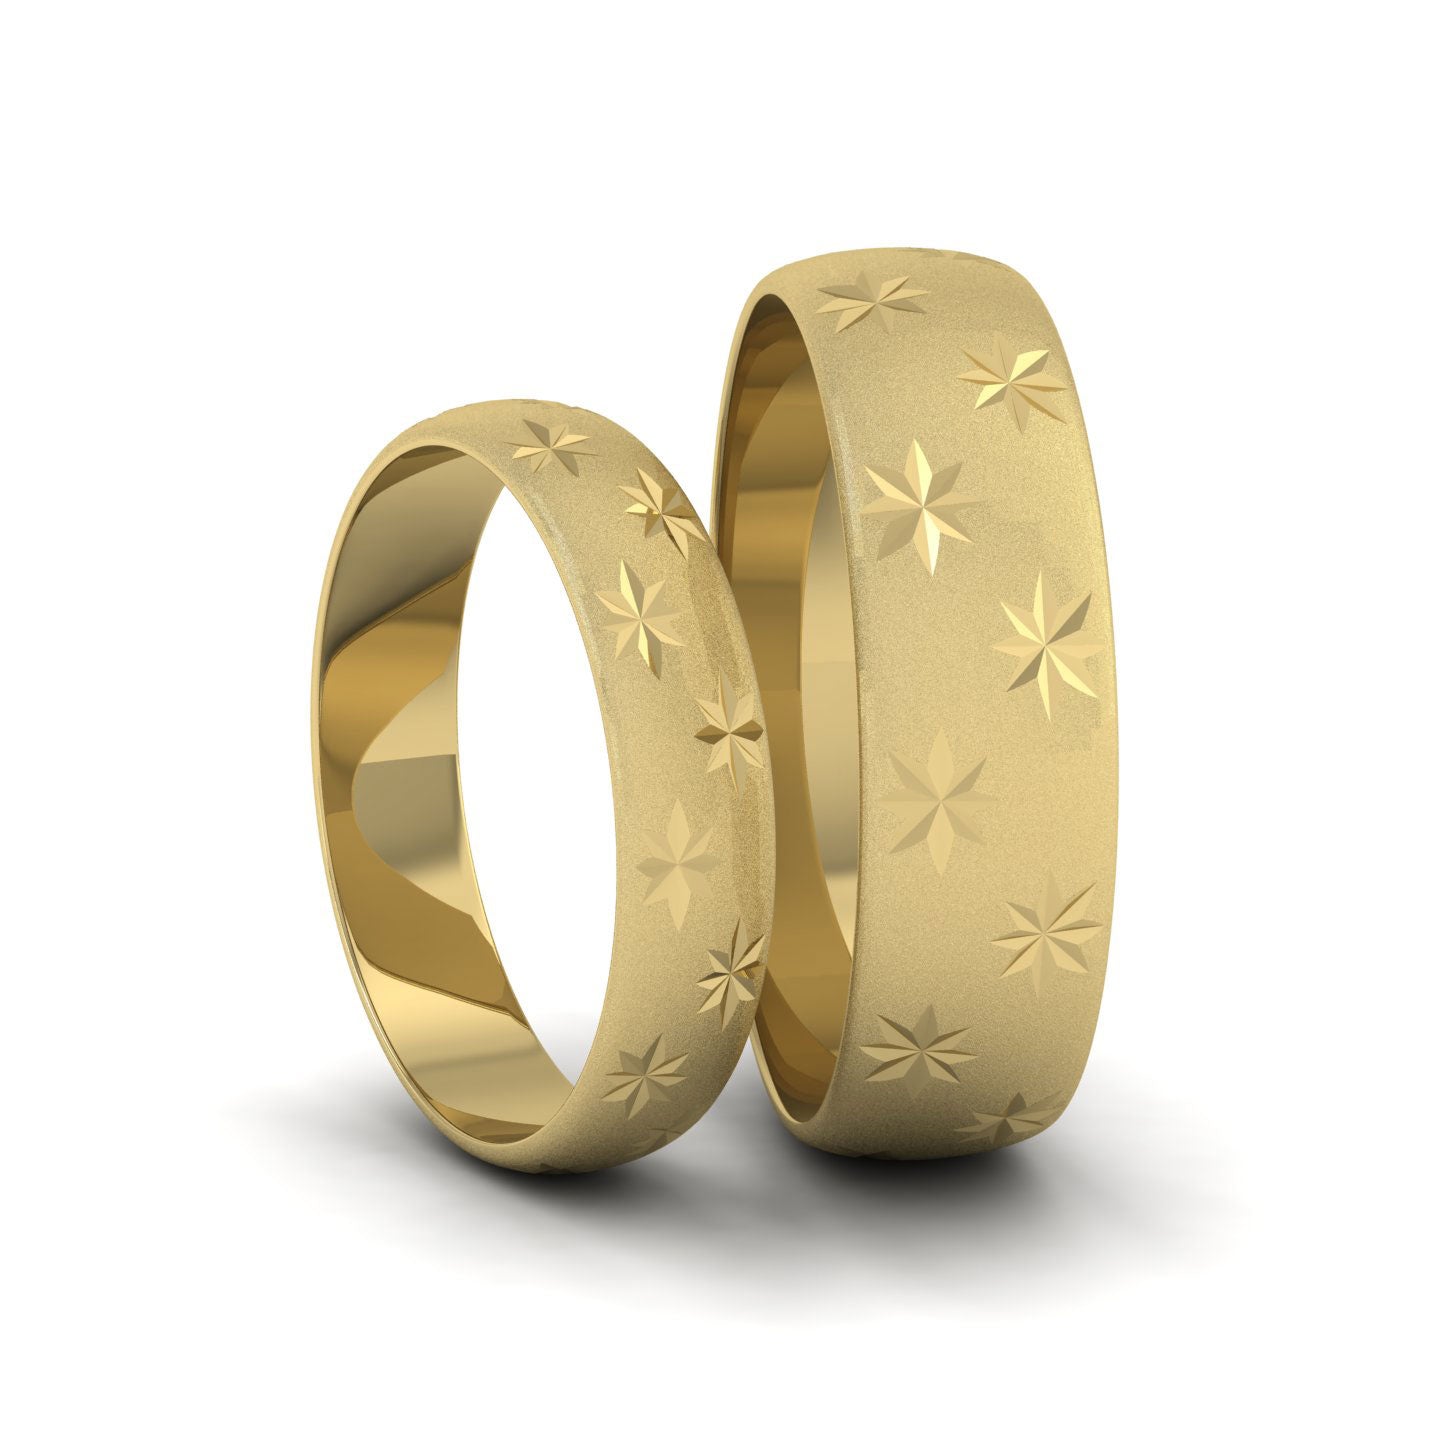 Star Patterned 9ct Yellow Gold 6mm Wedding Ring